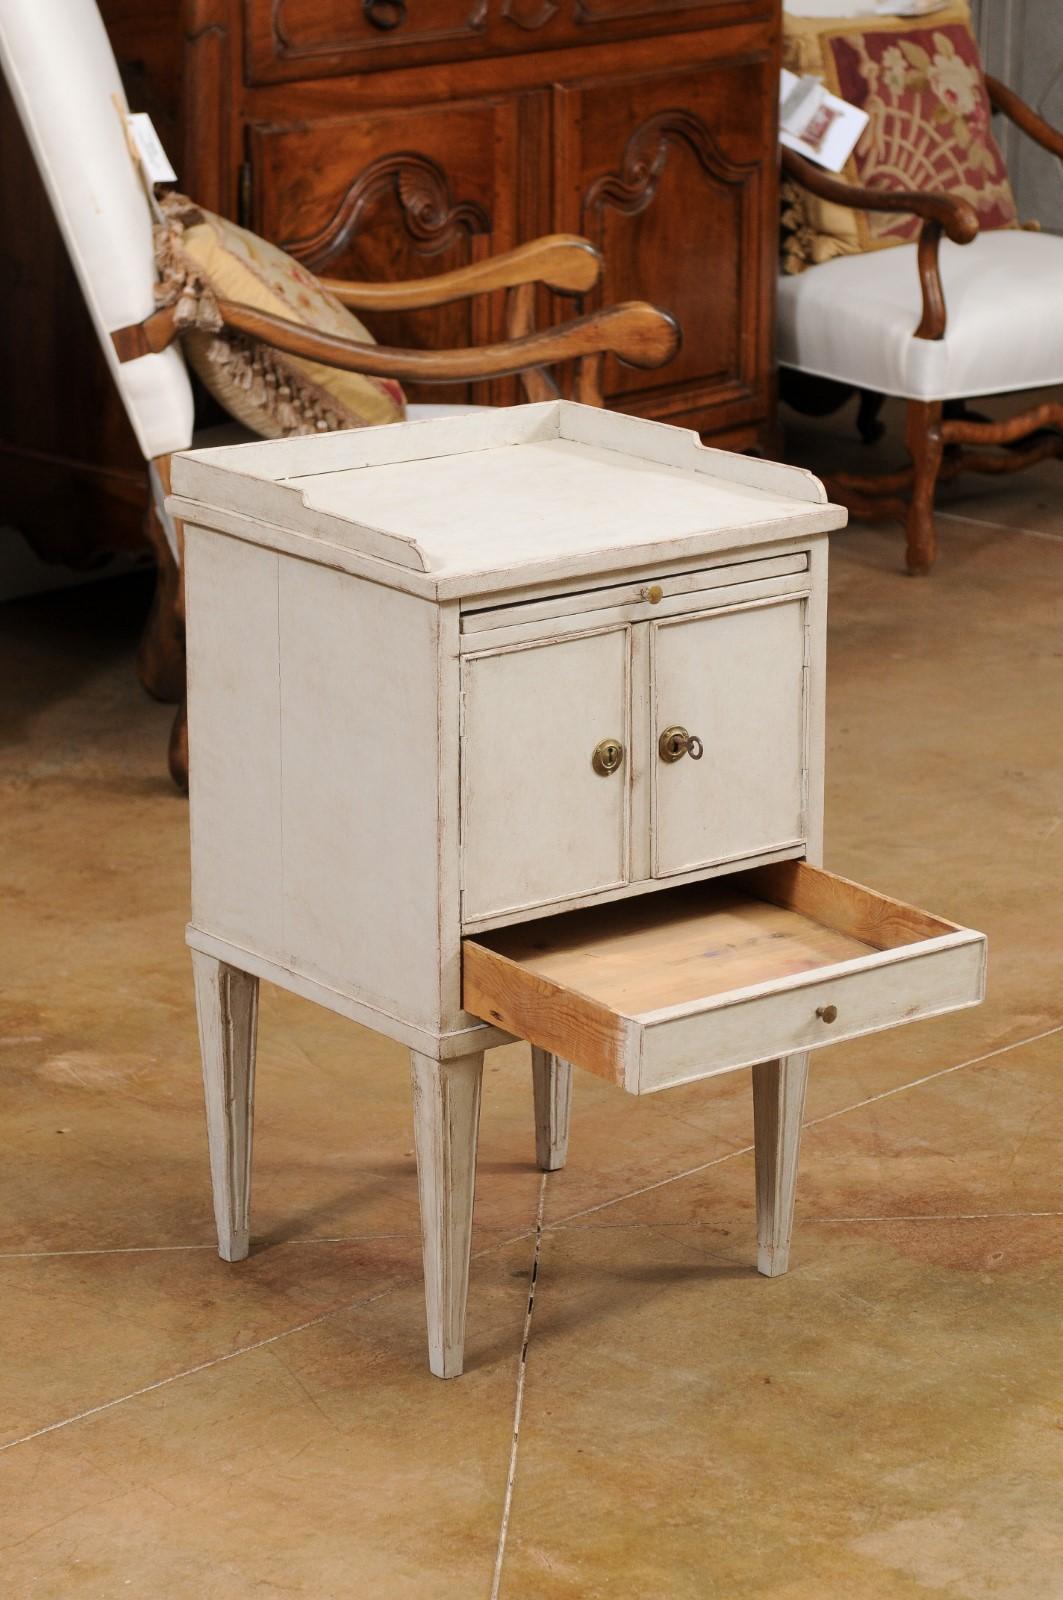 A Swedish painted wood nightstand table from the late 19th century, with doors and drawers. Created in Sweden during the last quarter of the 19th century, this painted bedside table features a rectangular top surrounded by a three-quarter gallery,